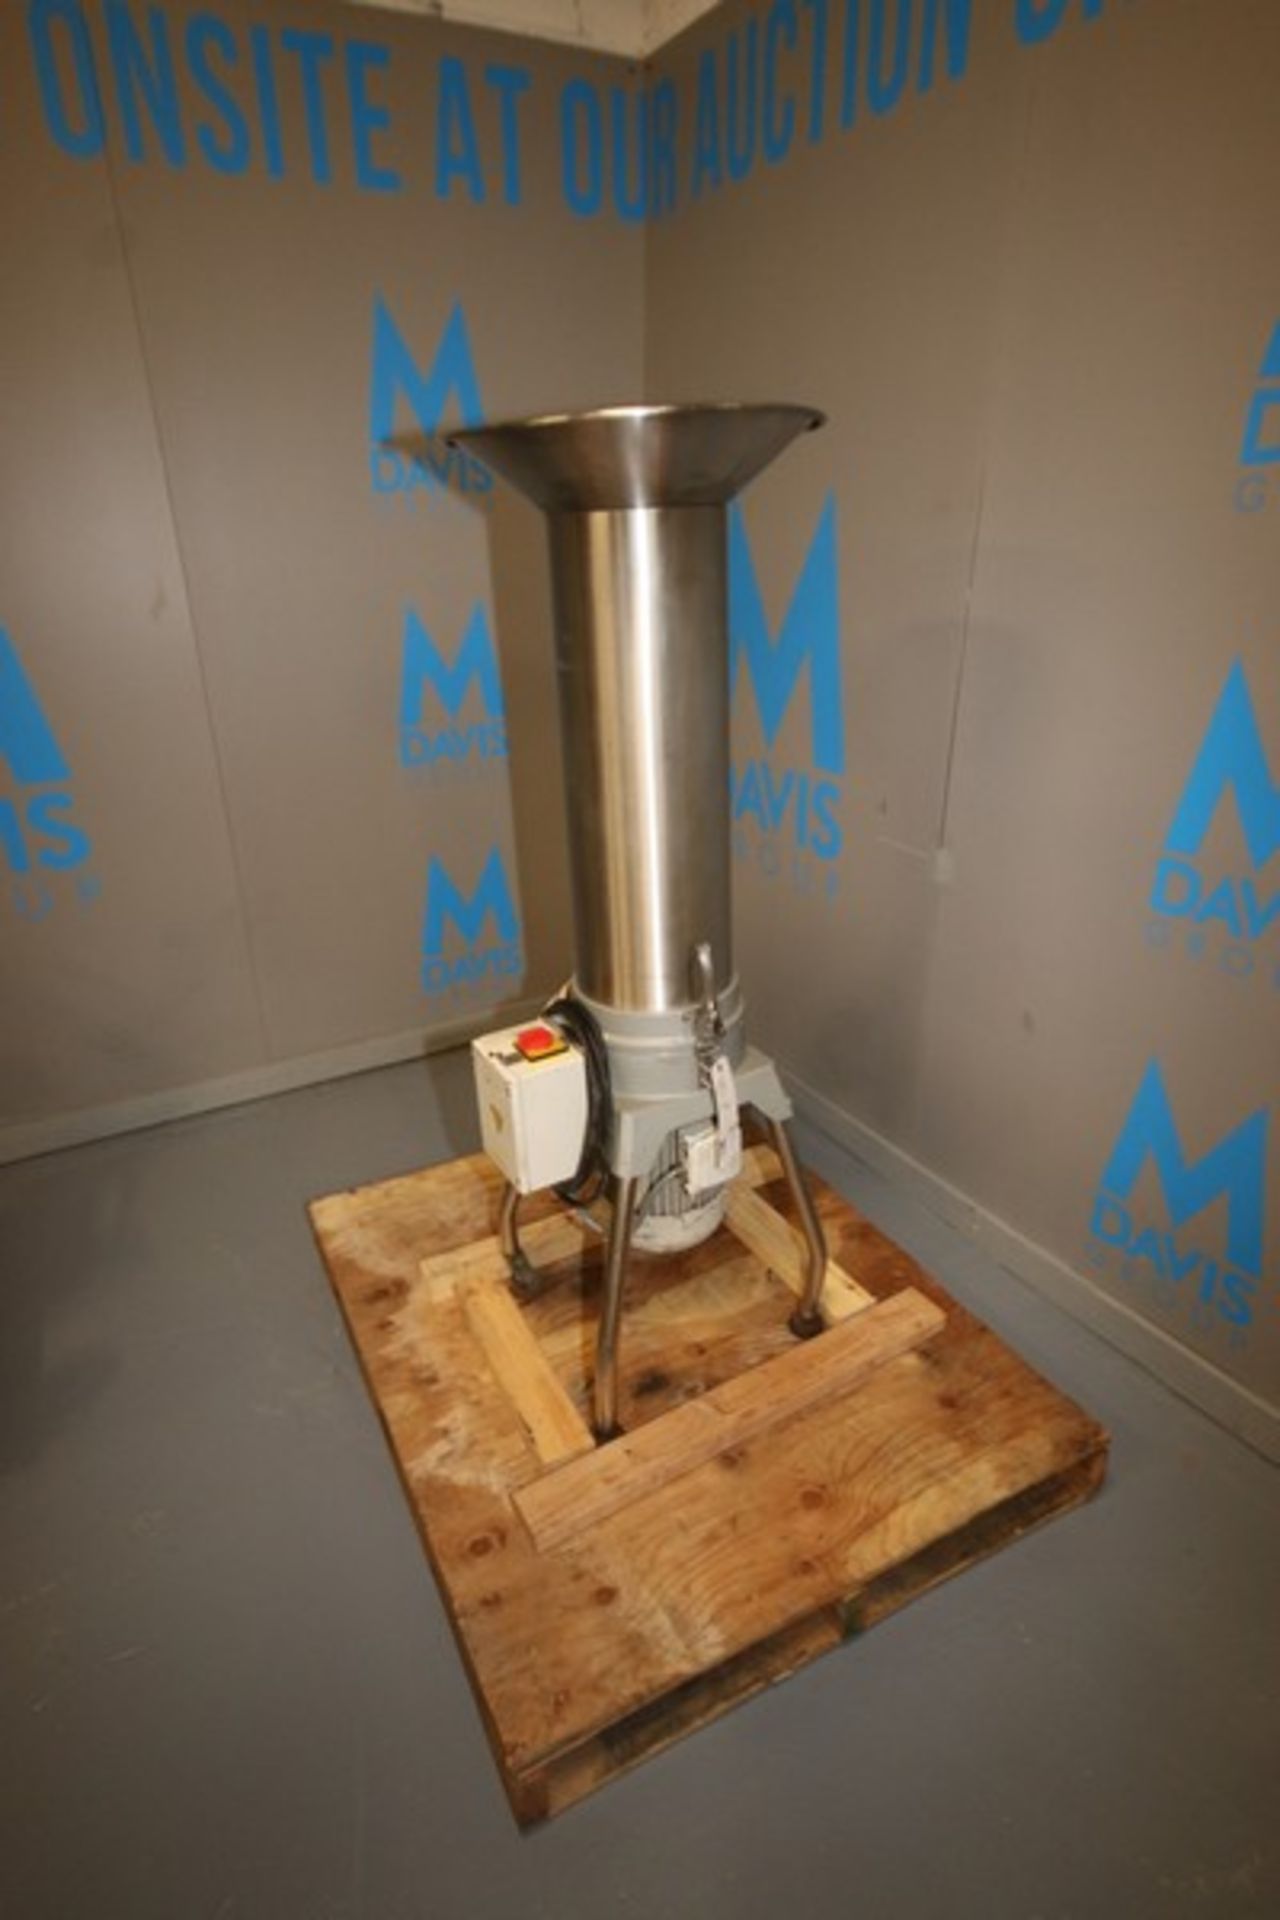 Diosna S/S Rest Bread Crusher,Type: RZ 4, Nr. No.: 104-139, 220 Volts, 3 Phase, with Bottom Mounted, - Image 3 of 9